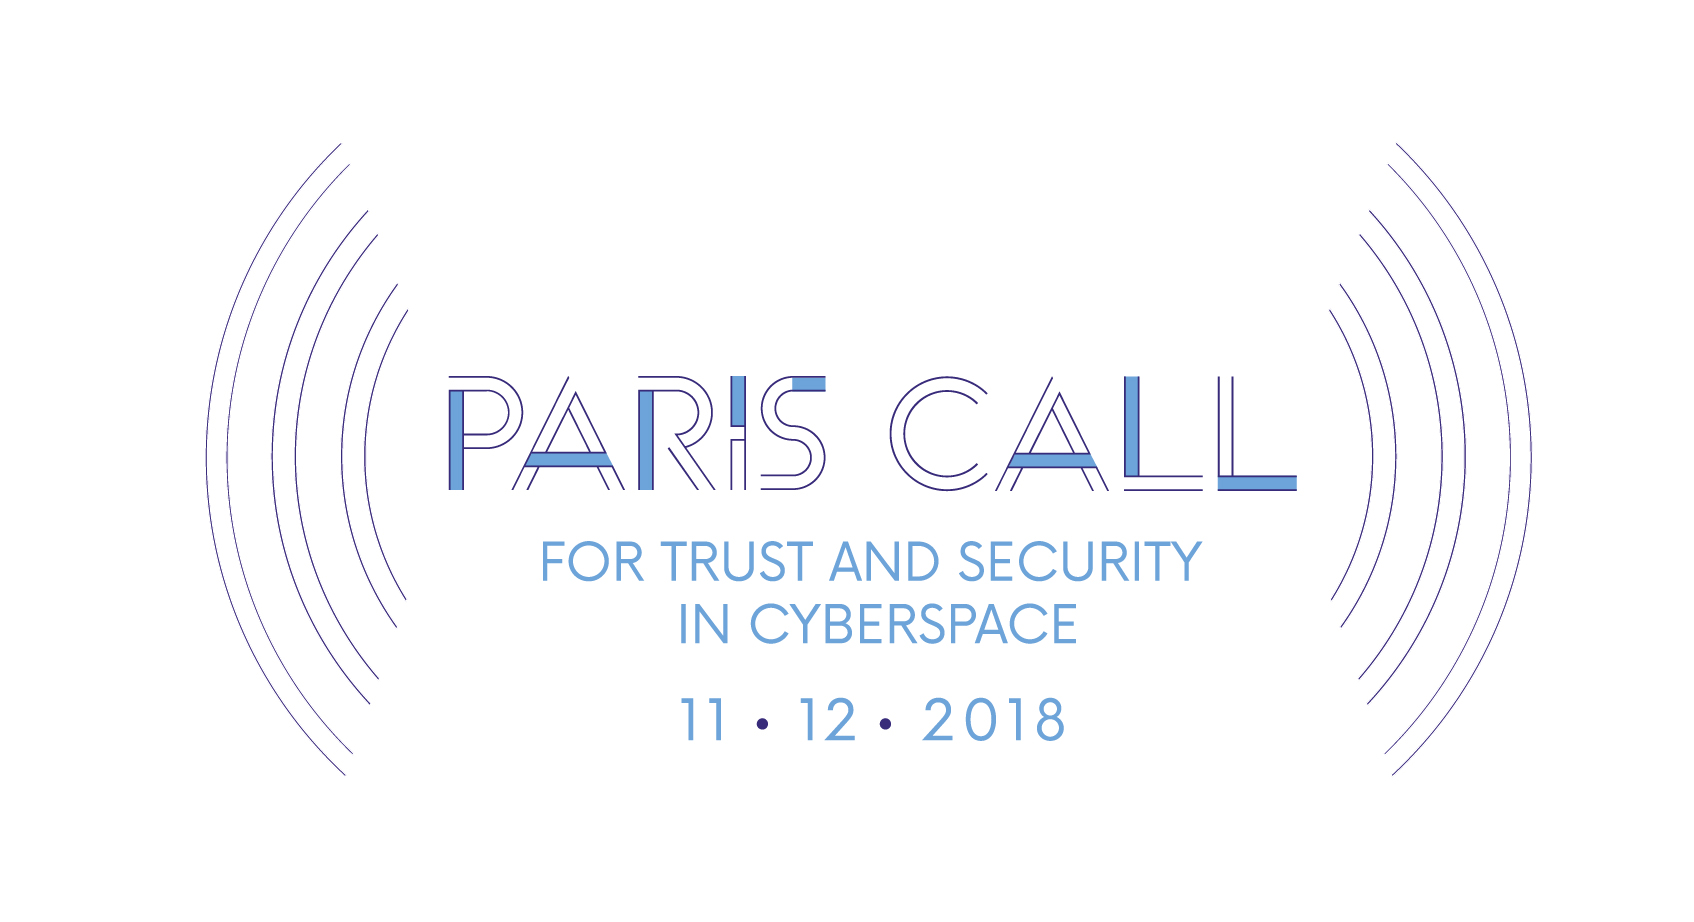 Club de Madrid supports the Paris Call for Trust and Security in Cyberspace